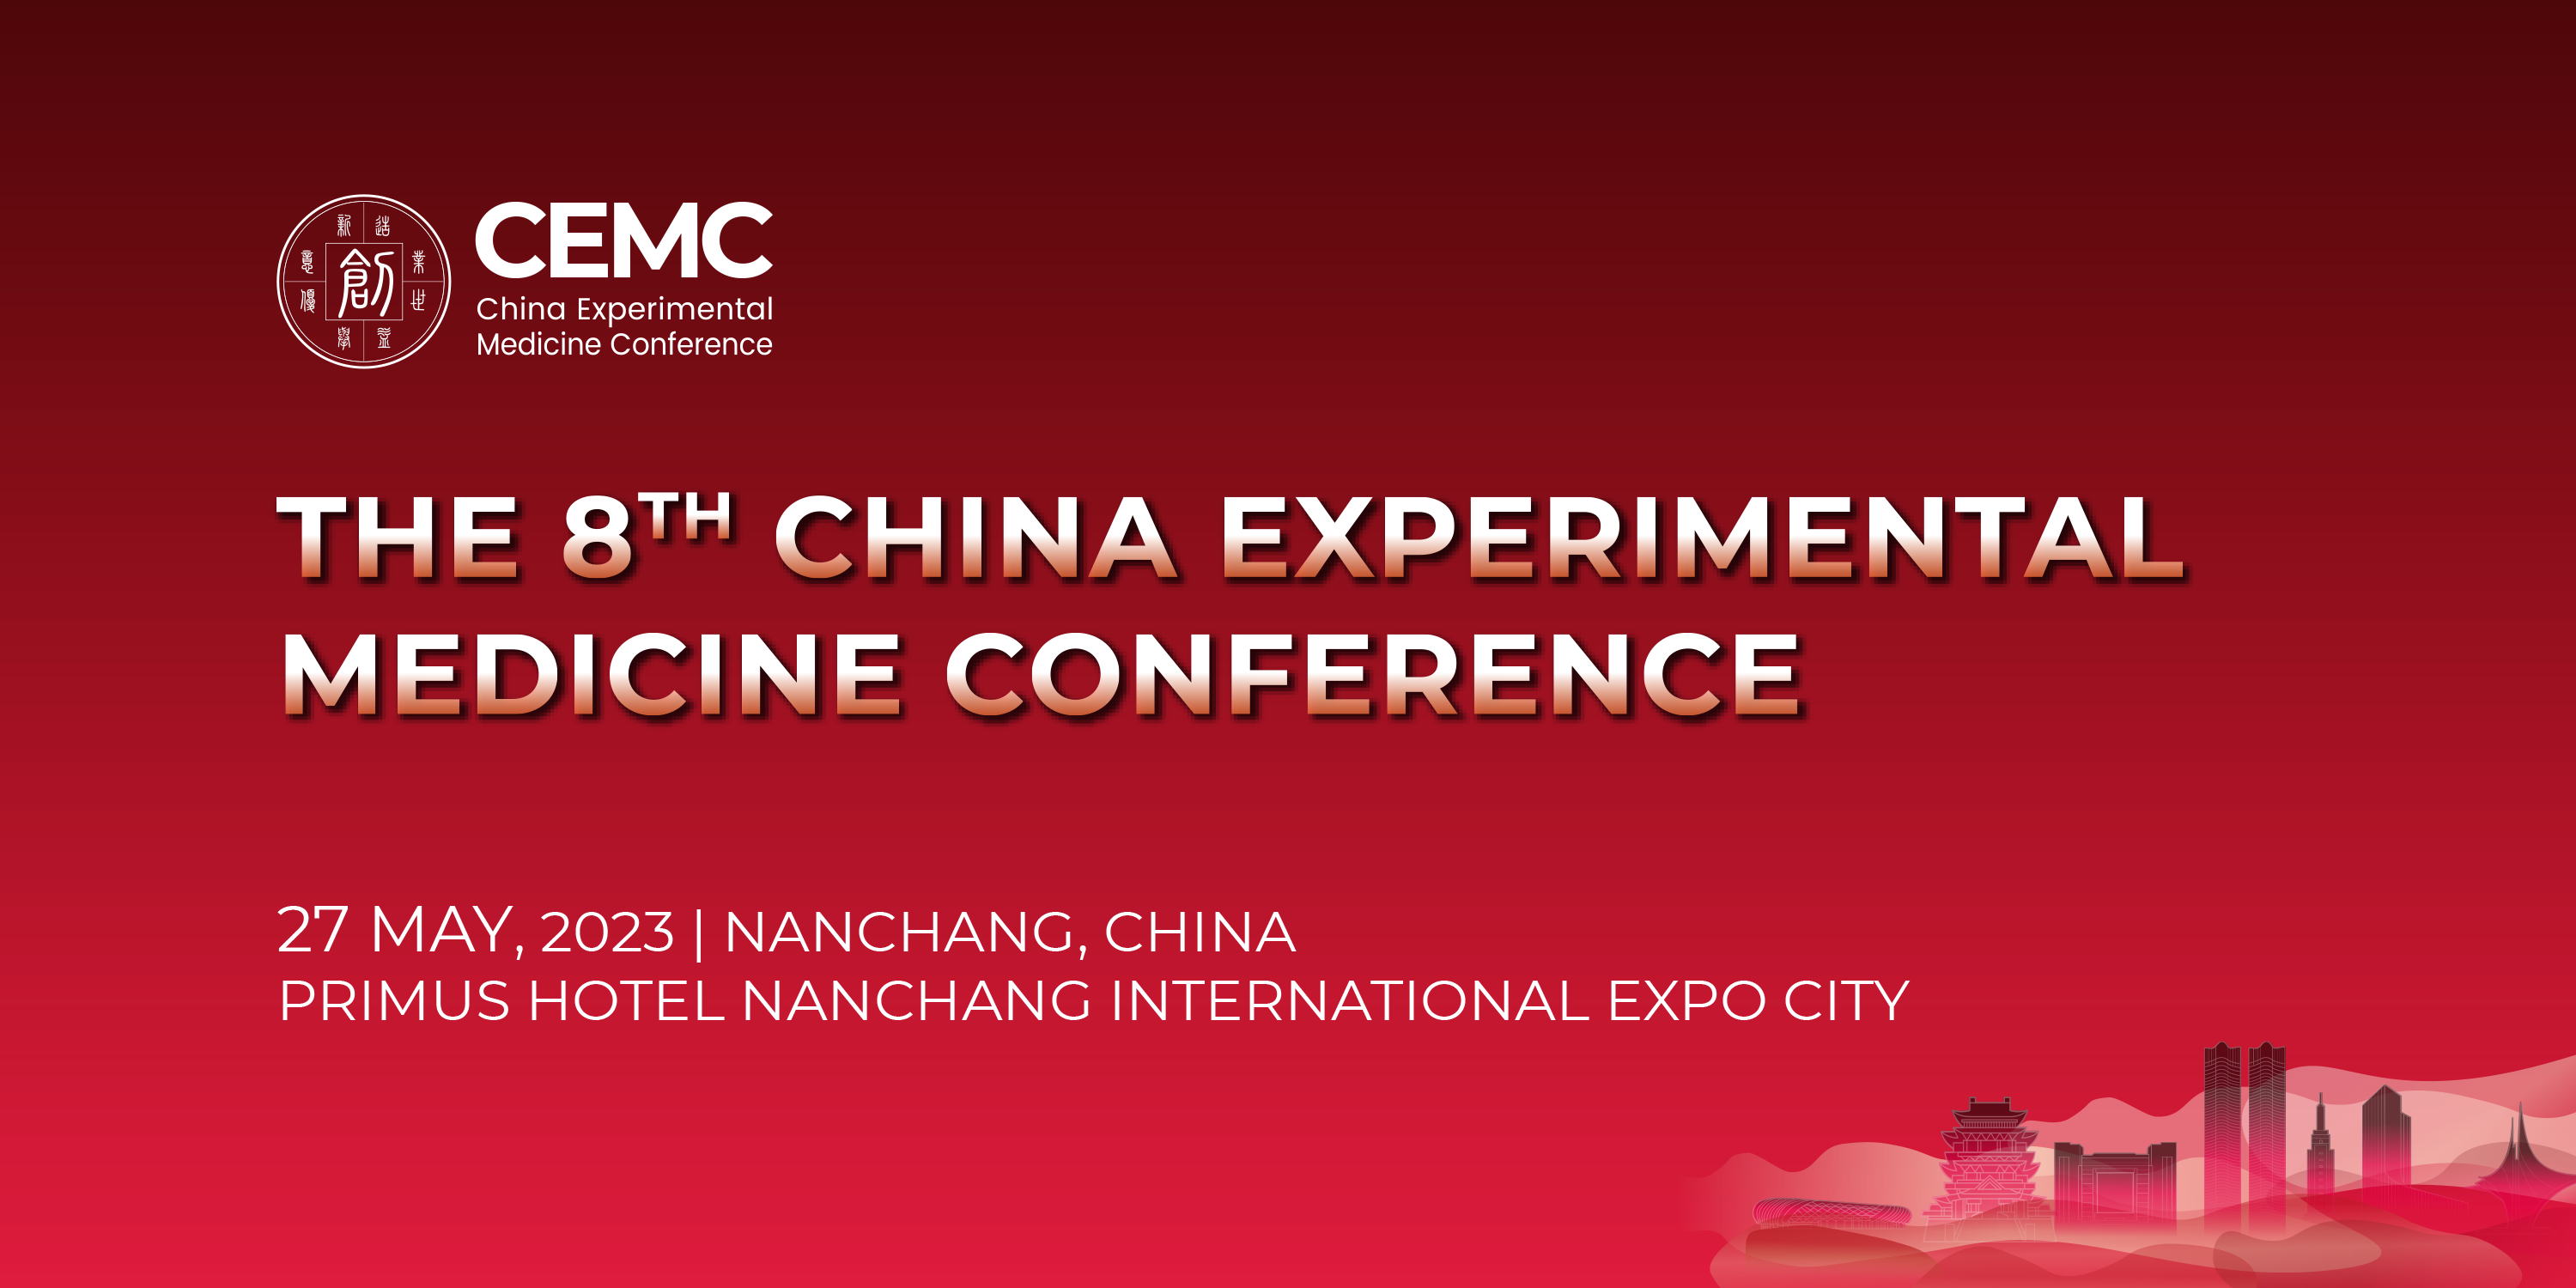 The 8th China Experimental Medicine Conference is scheduled on 27 May